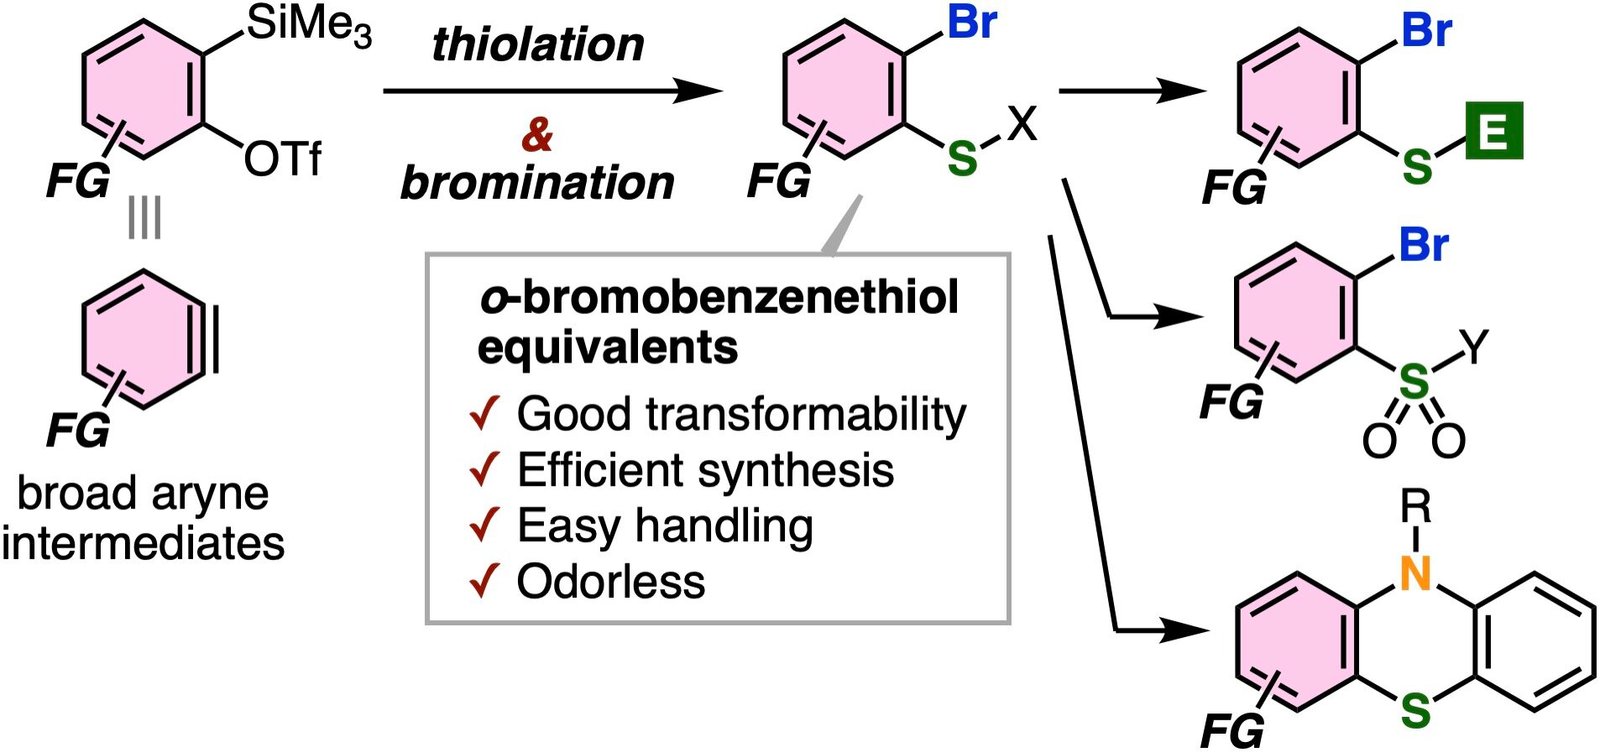 A novel approach for synthesis of functionalized benzenethiol equivalents